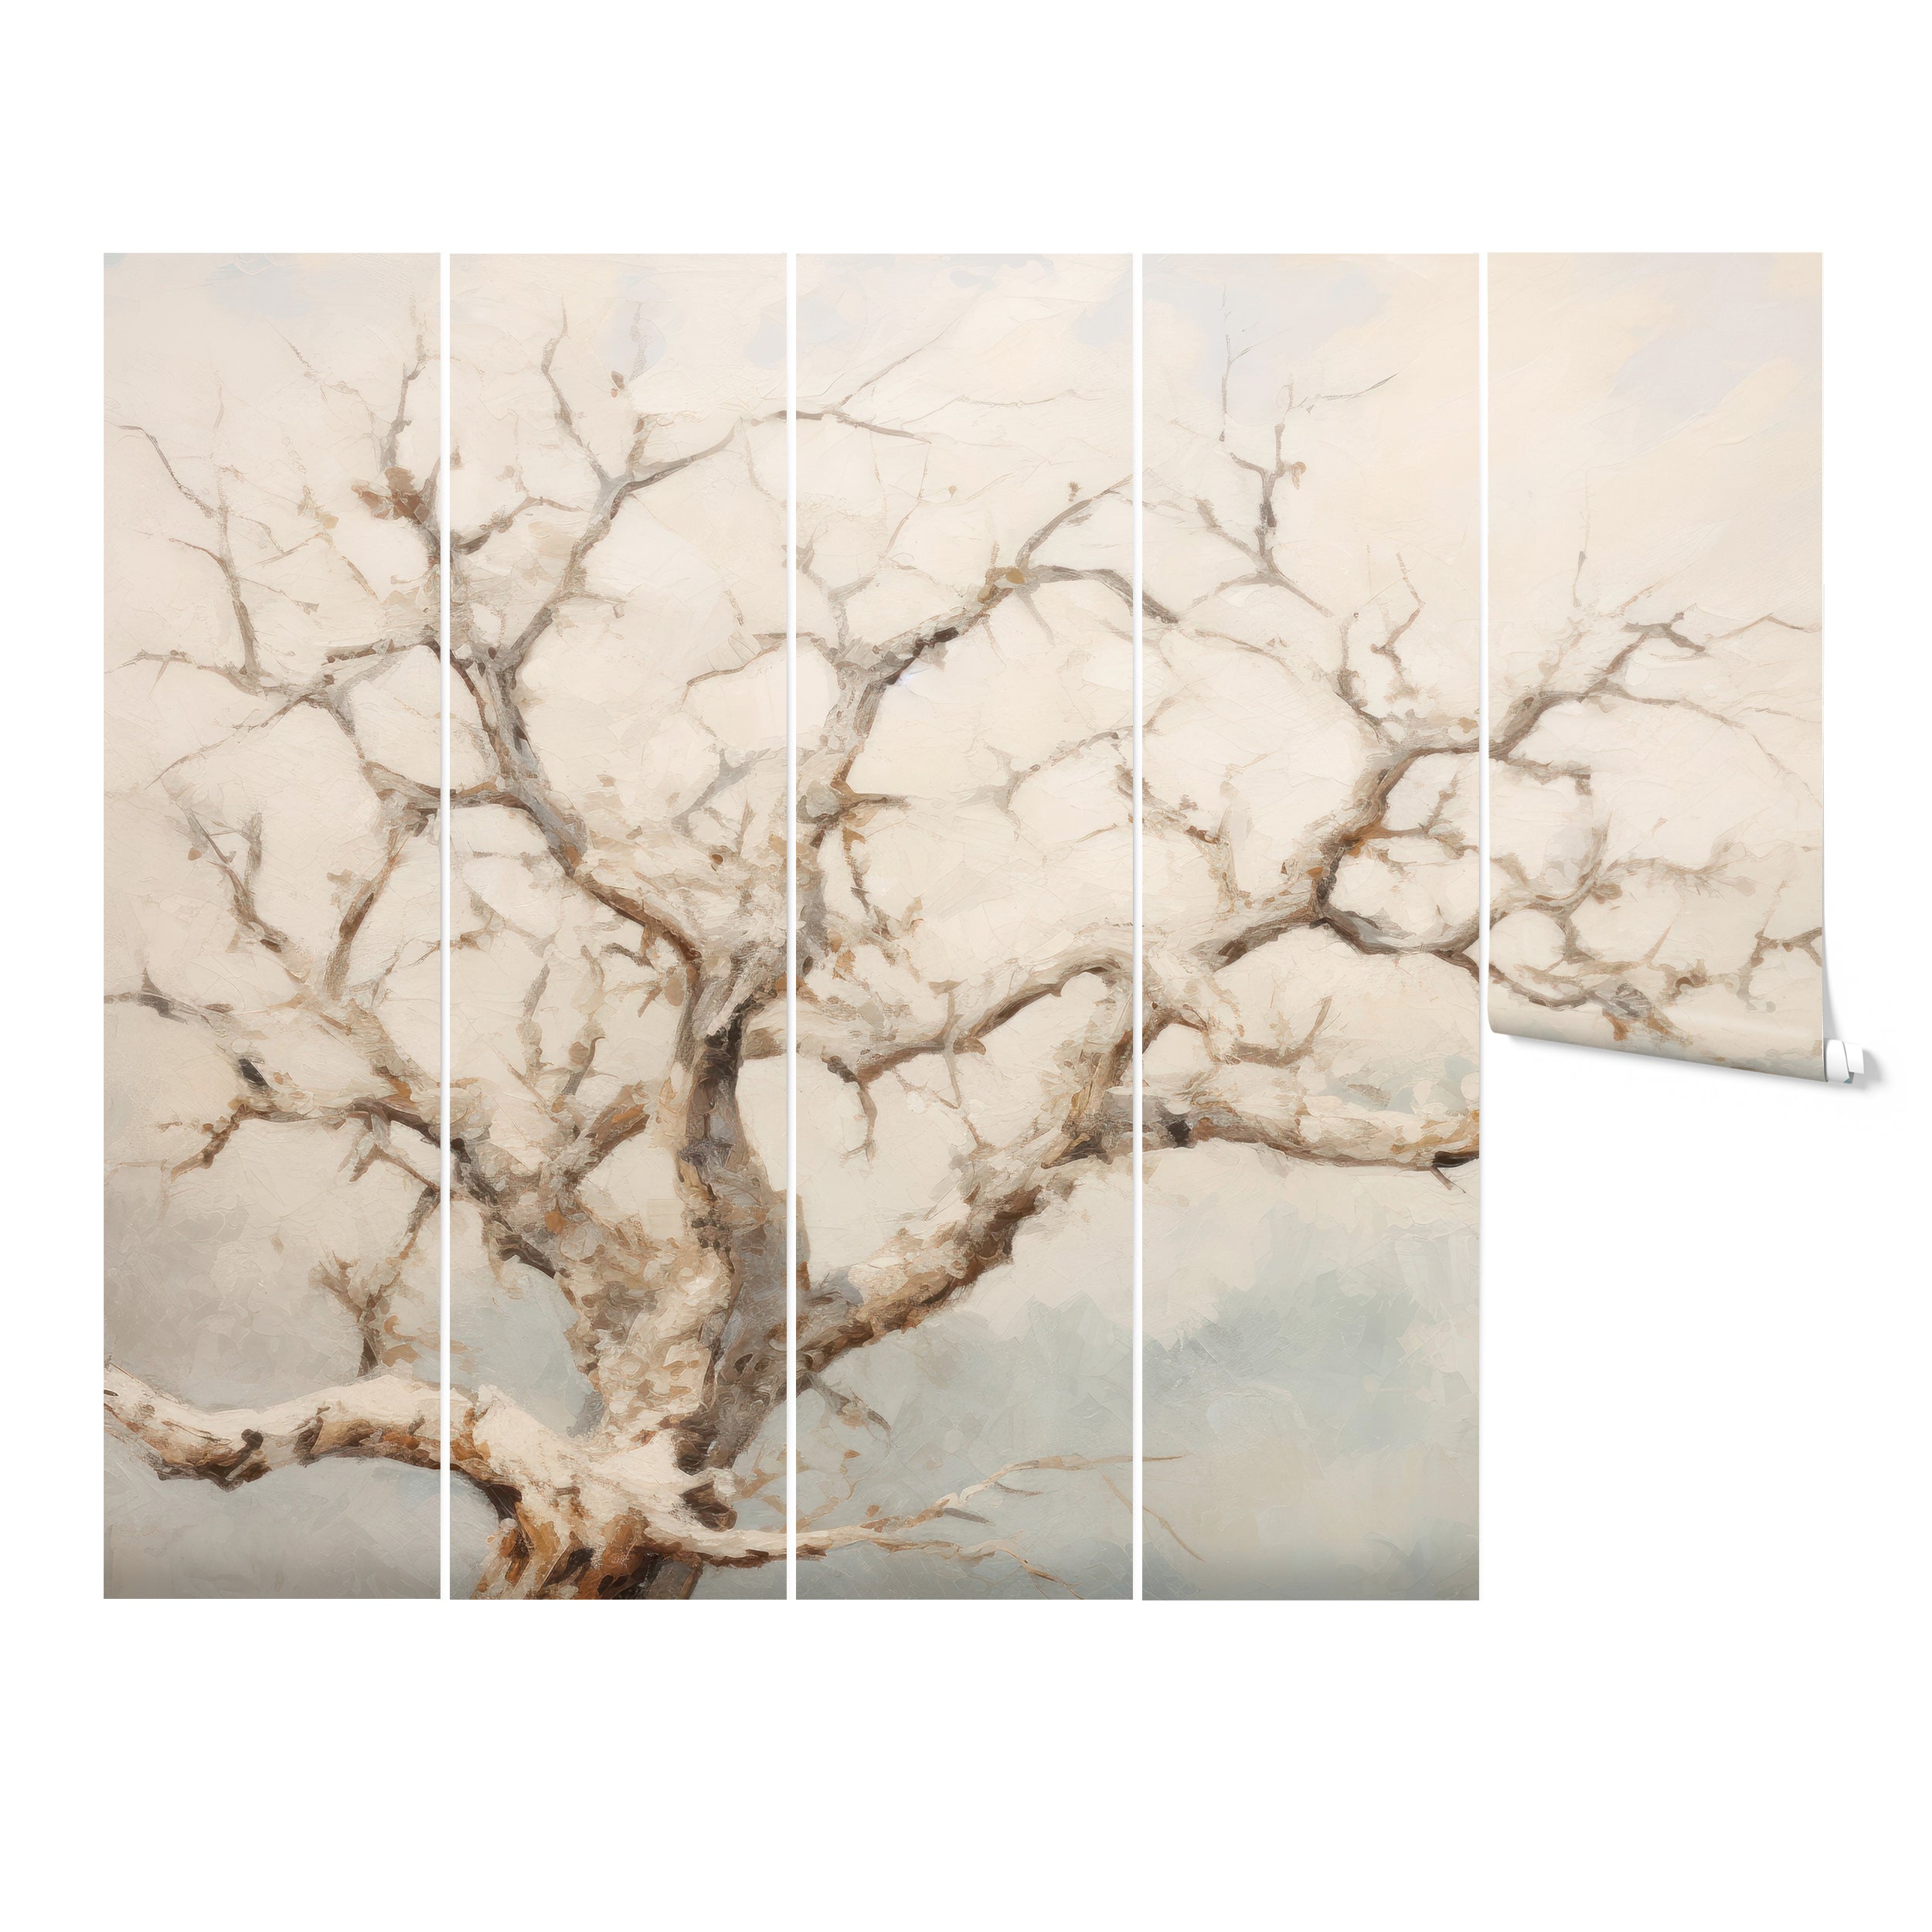 Winter Tree Mural displayed in a 5-roll format showcasing the detailed leafless tree design against a serene pastel background.